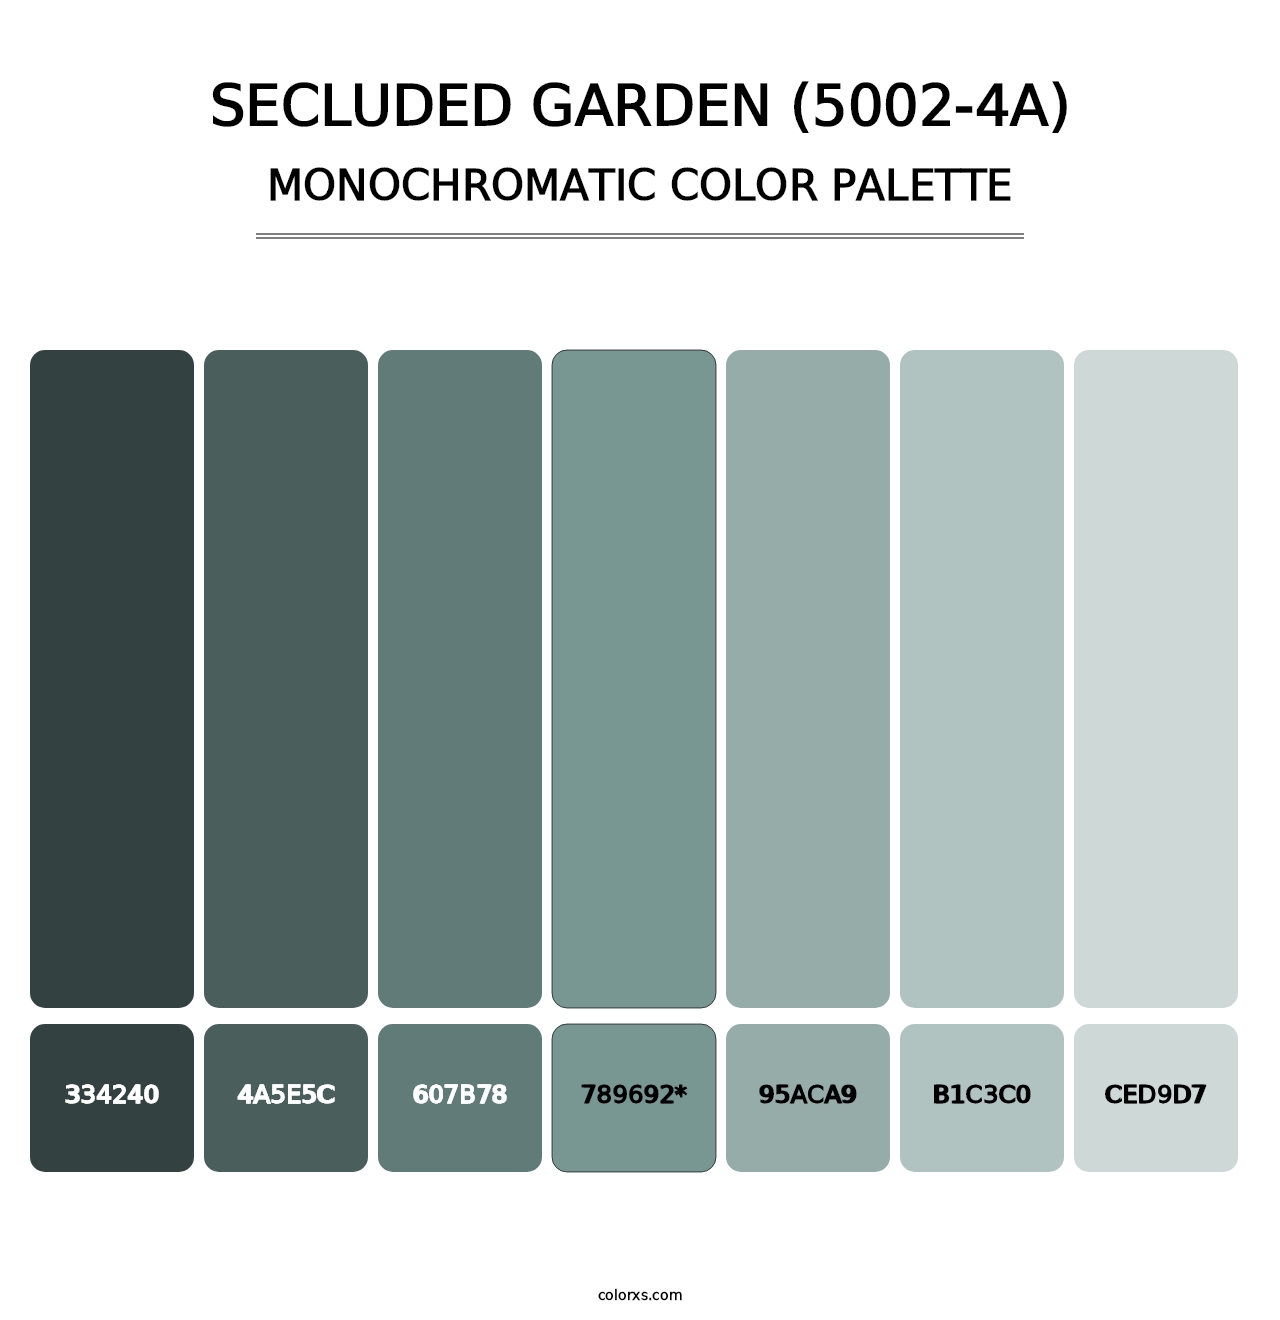 Secluded Garden (5002-4A) - Monochromatic Color Palette